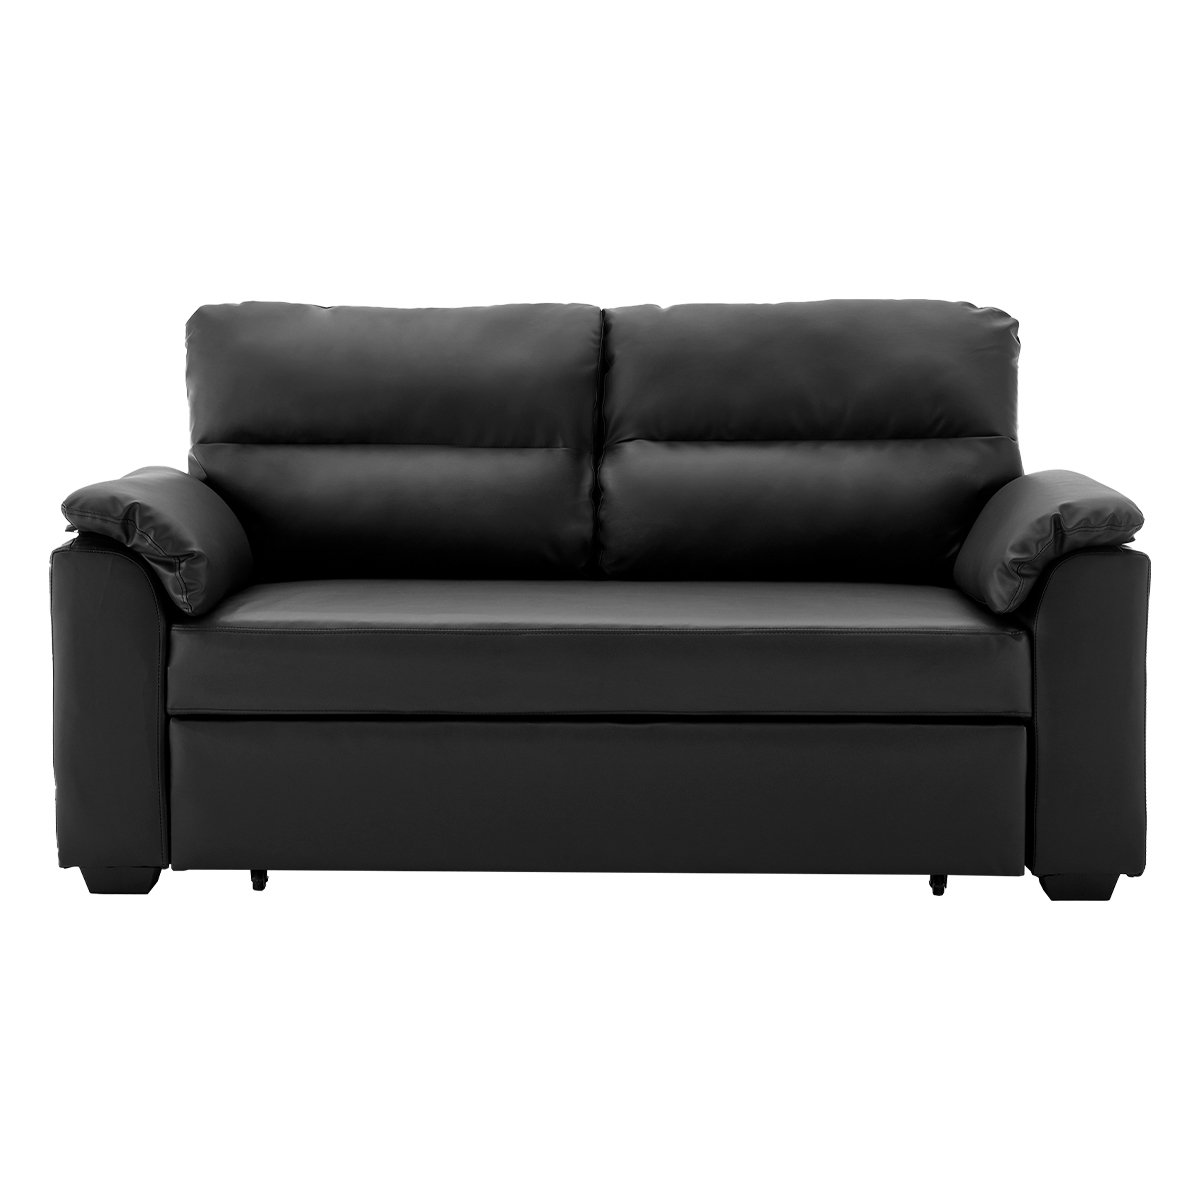 Sarantino Faux Leather Sofa Bed Couch Lounge - Black 1